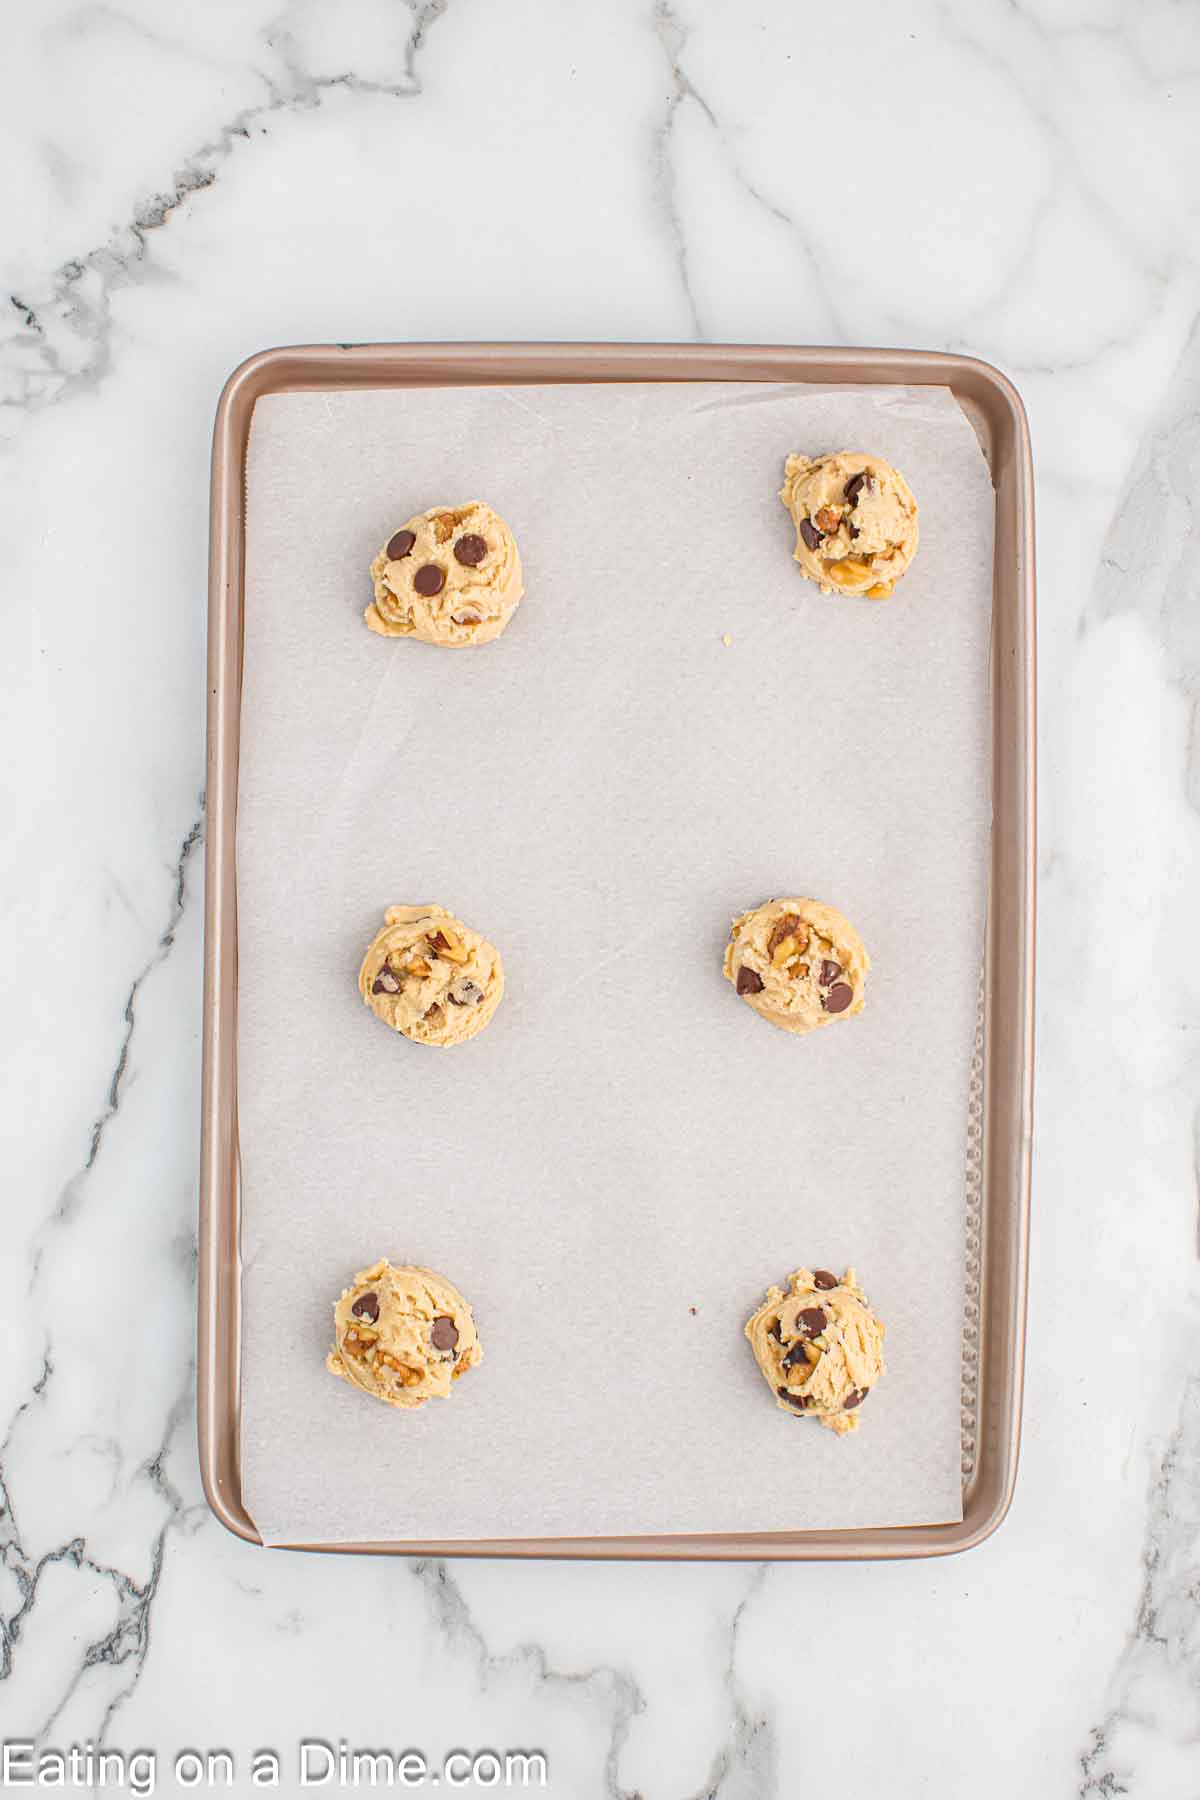 Placing the cookie dough on a baking sheet